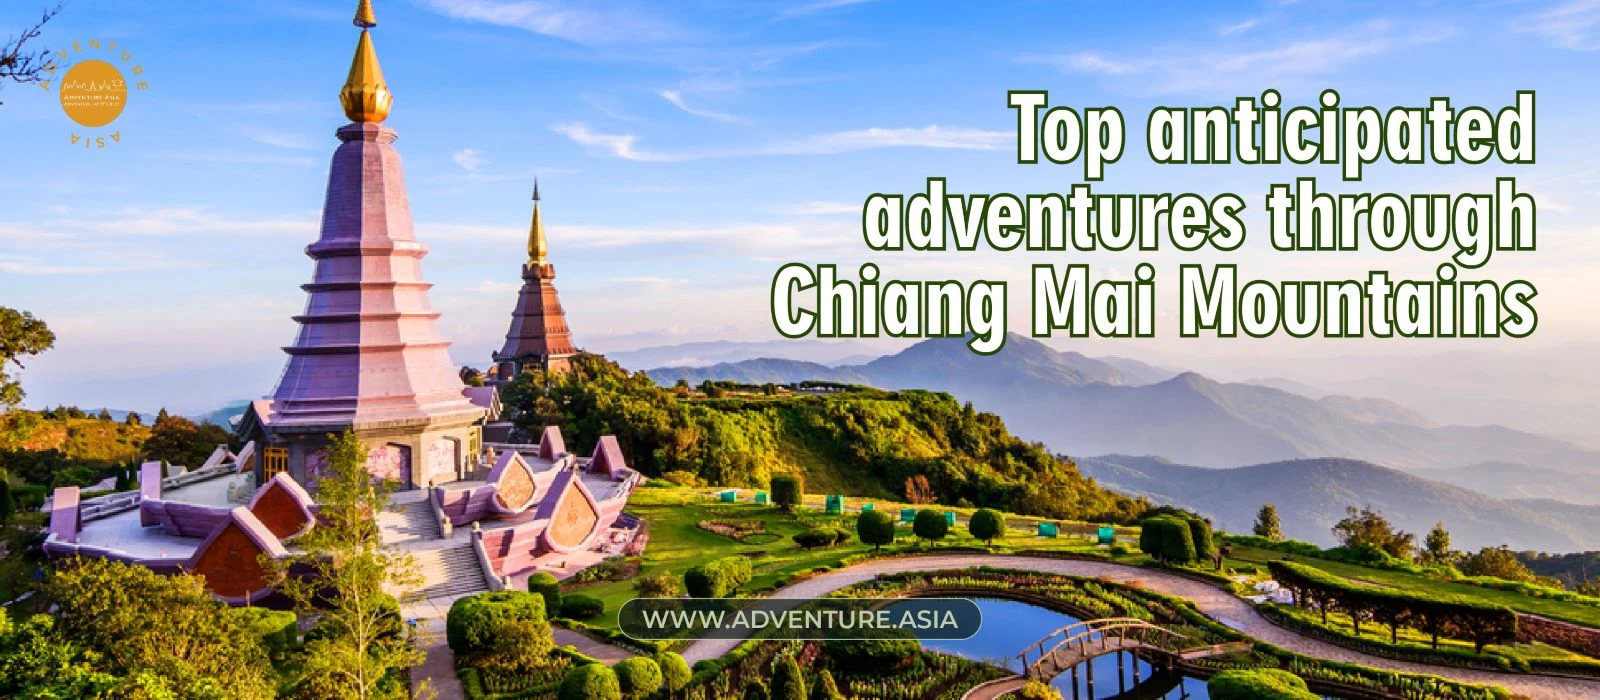 The most anticipated adventures through the Chiang Mai Thailand Mountains